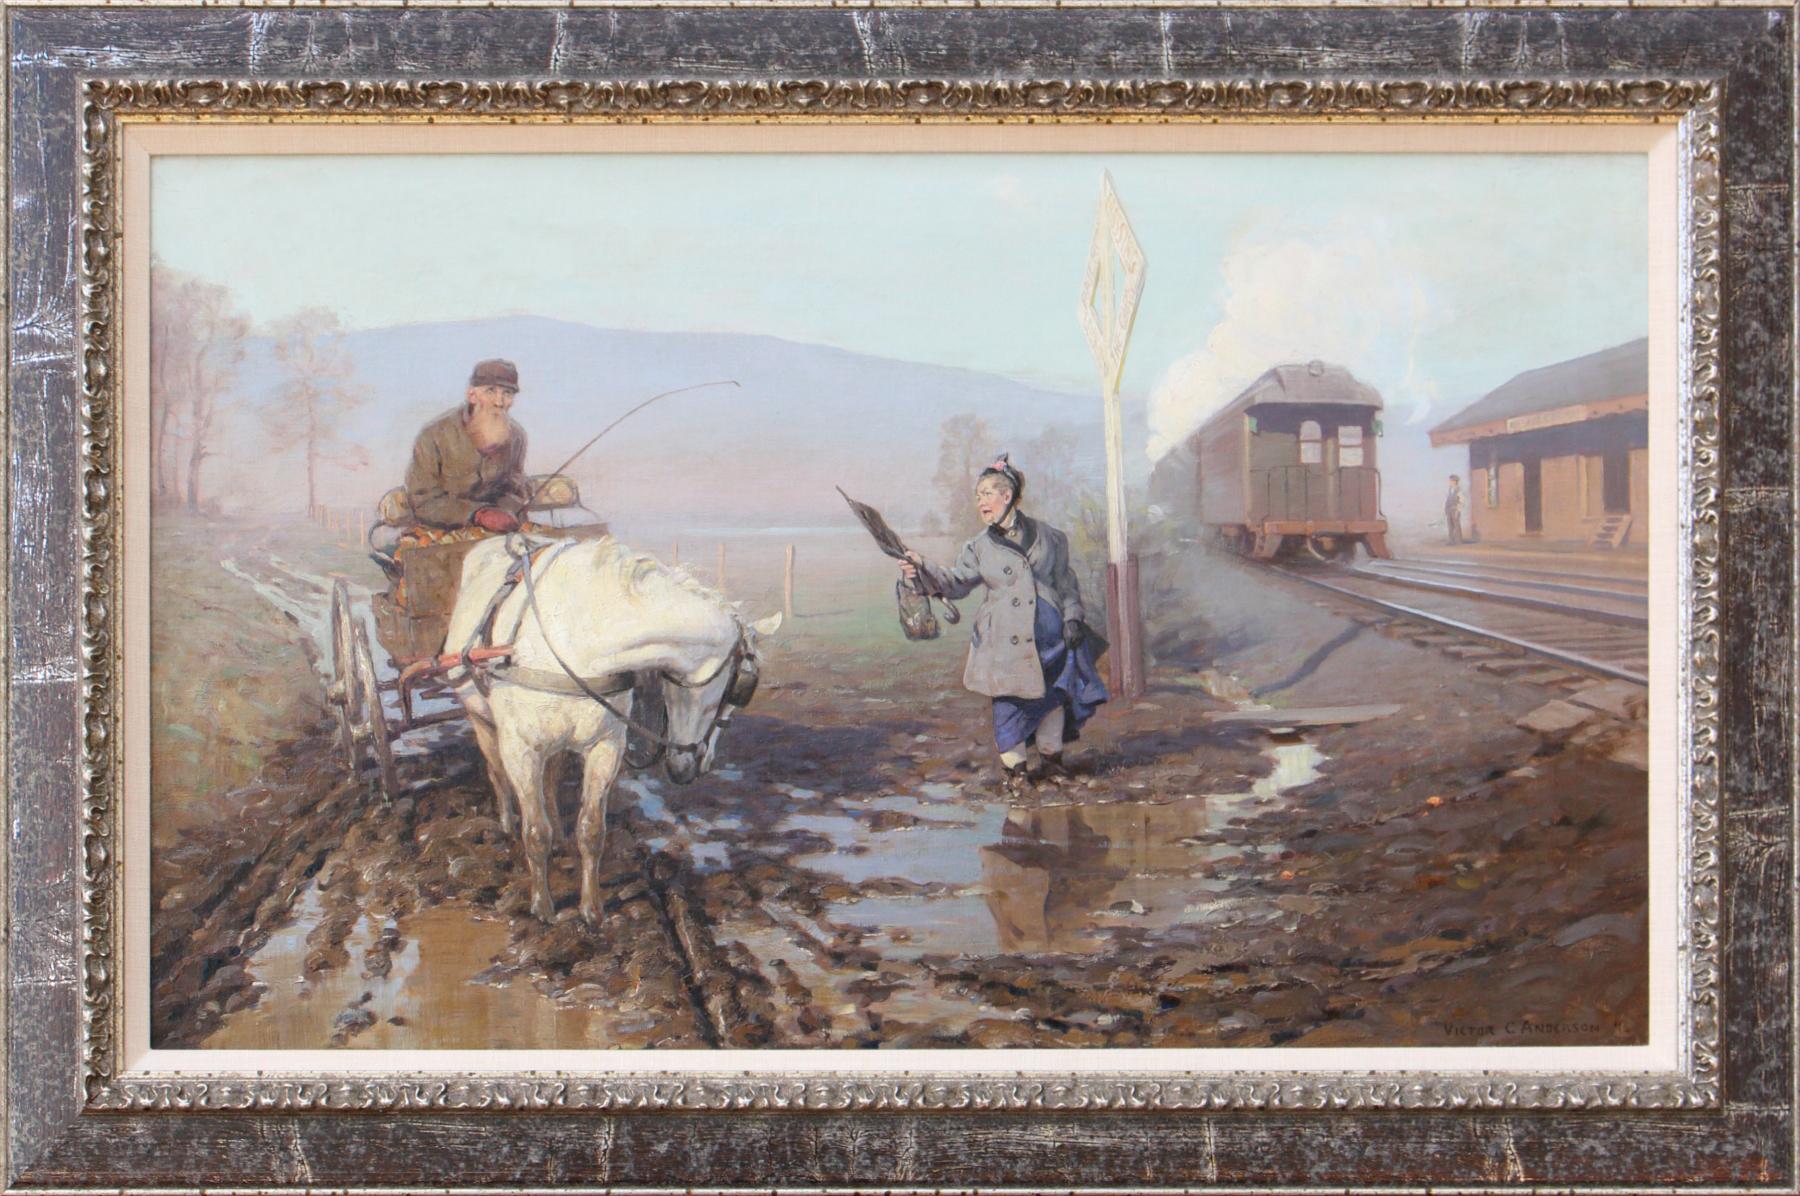 Muddy Train Station - Painting by Victor Coleman Anderson